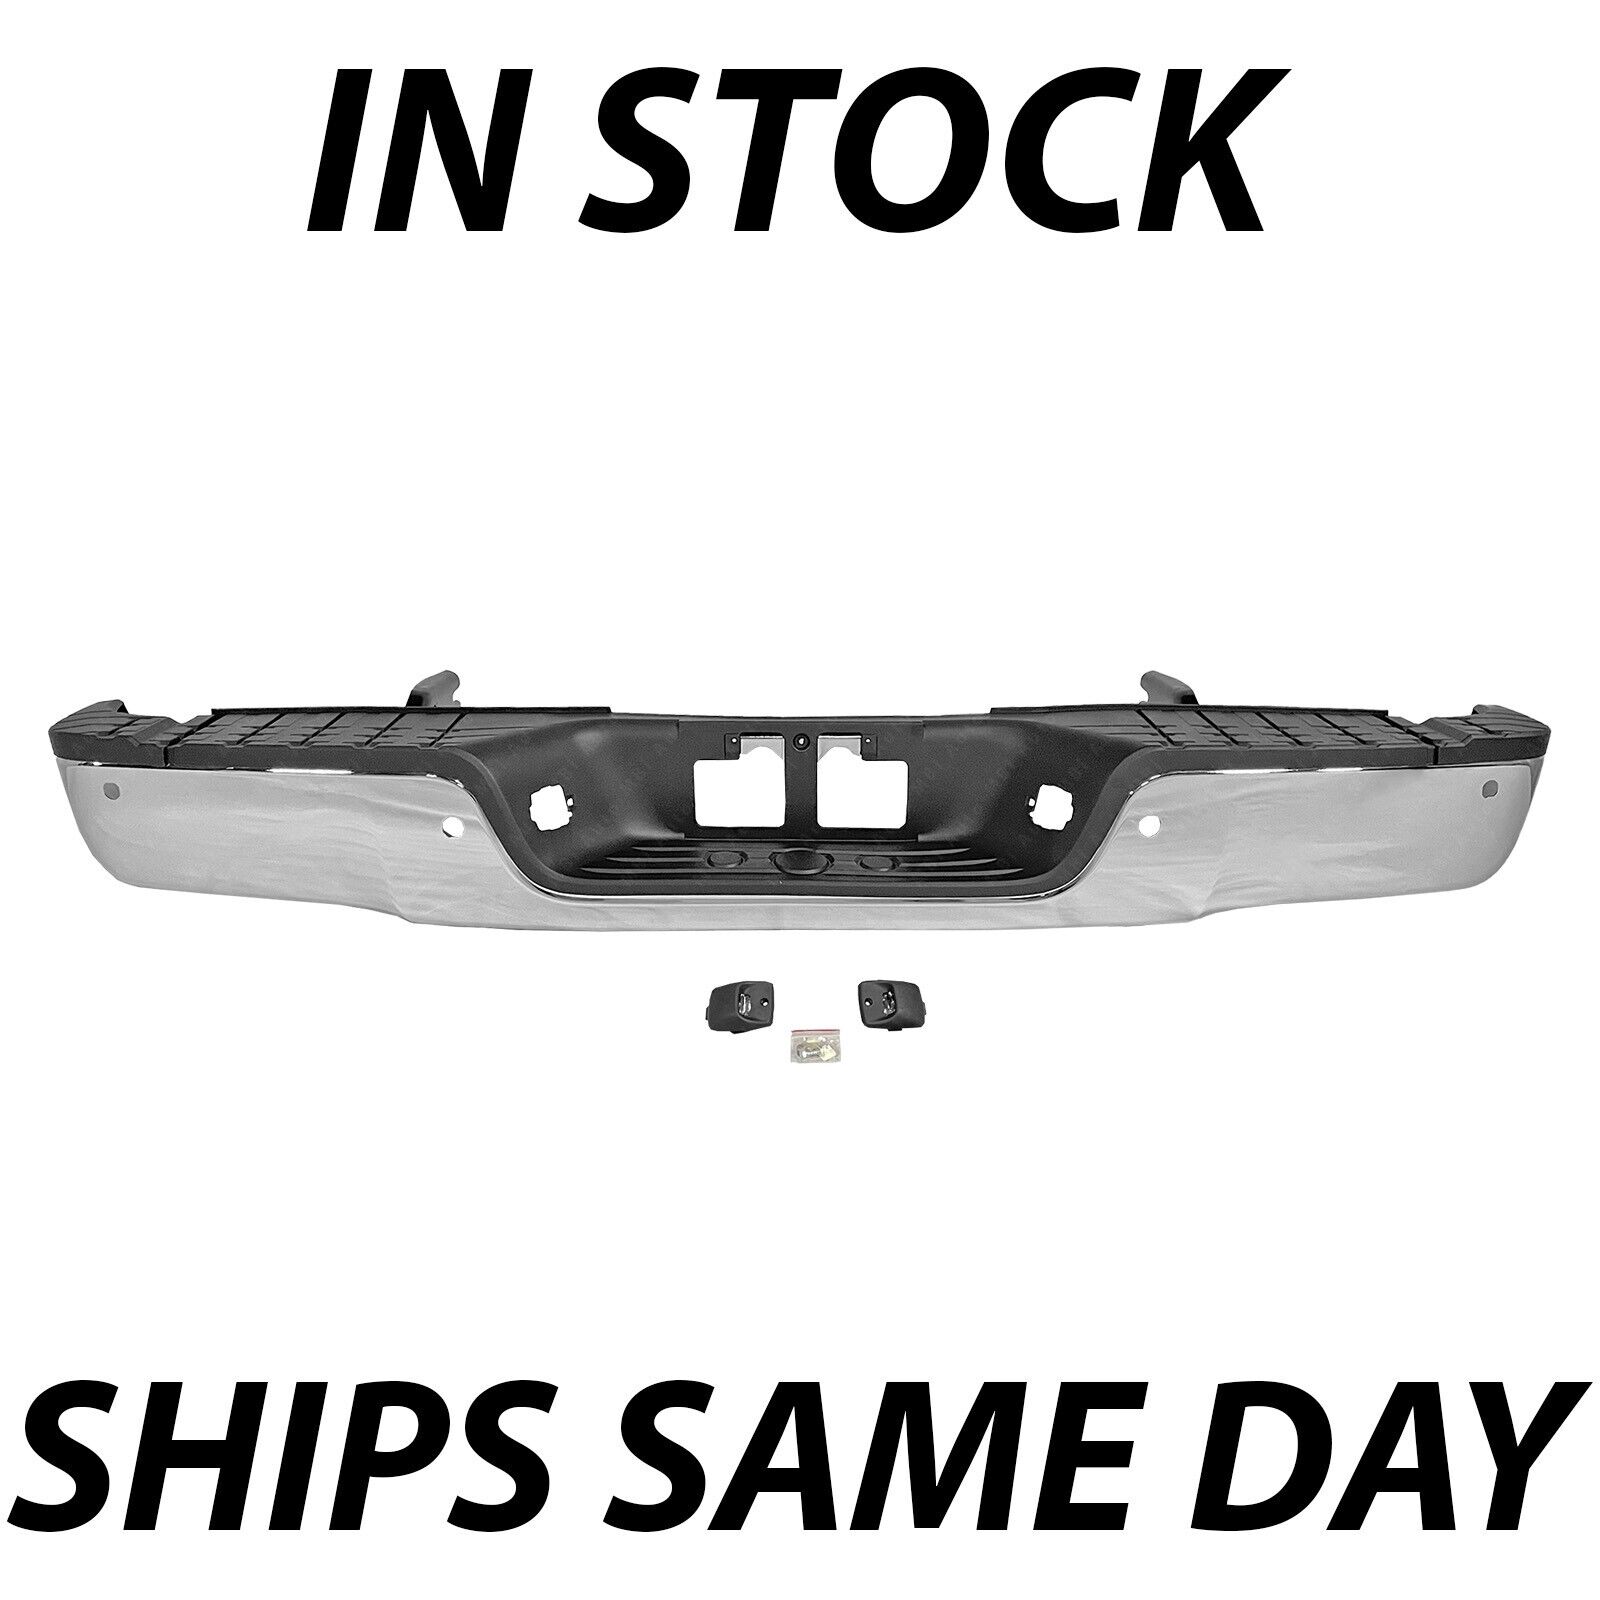 NEW Chrome - Steel Rear Step Bumper Assembly for 2007-2013 Toyota Tundra w/ Park